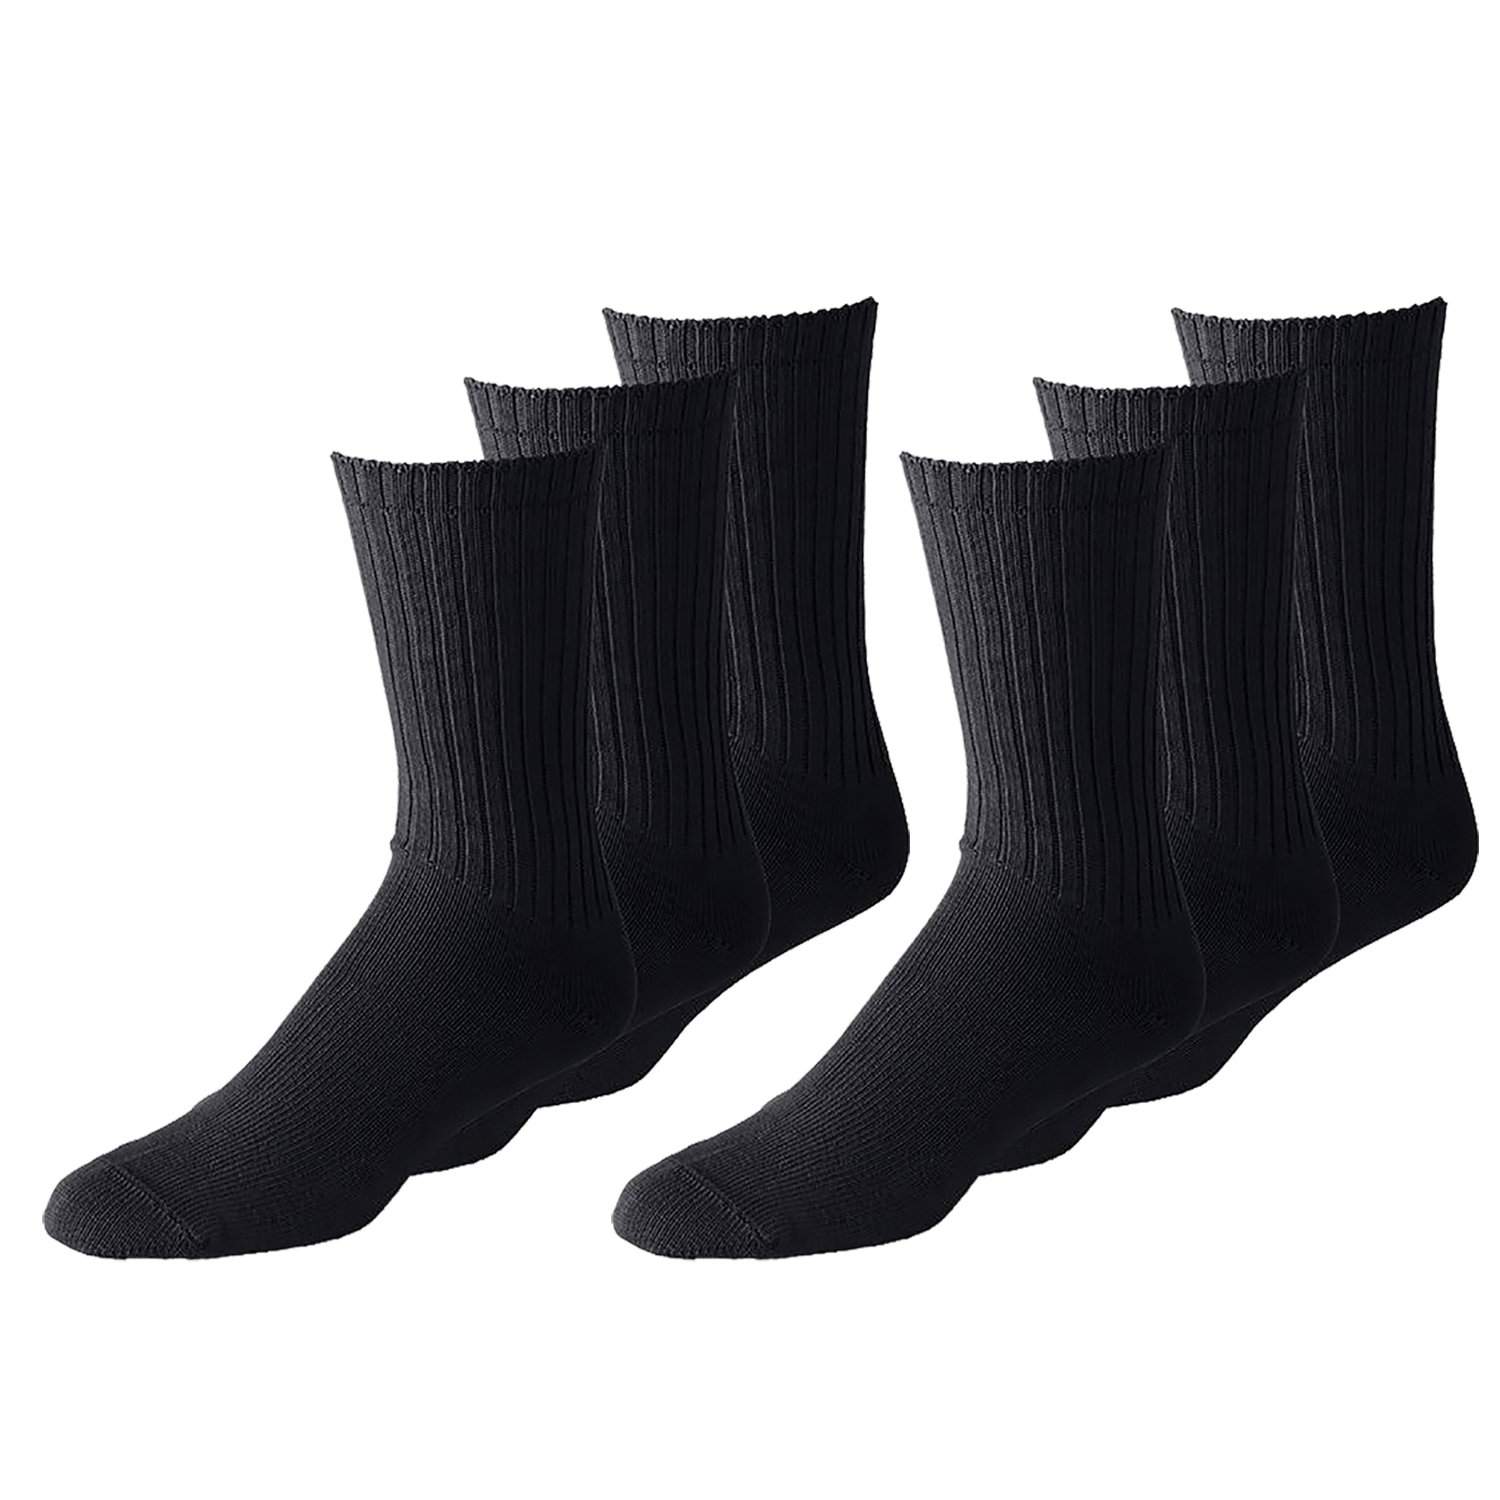 Mechaly Mens Crew and Low Cut Cotton Socks - 12 Pack